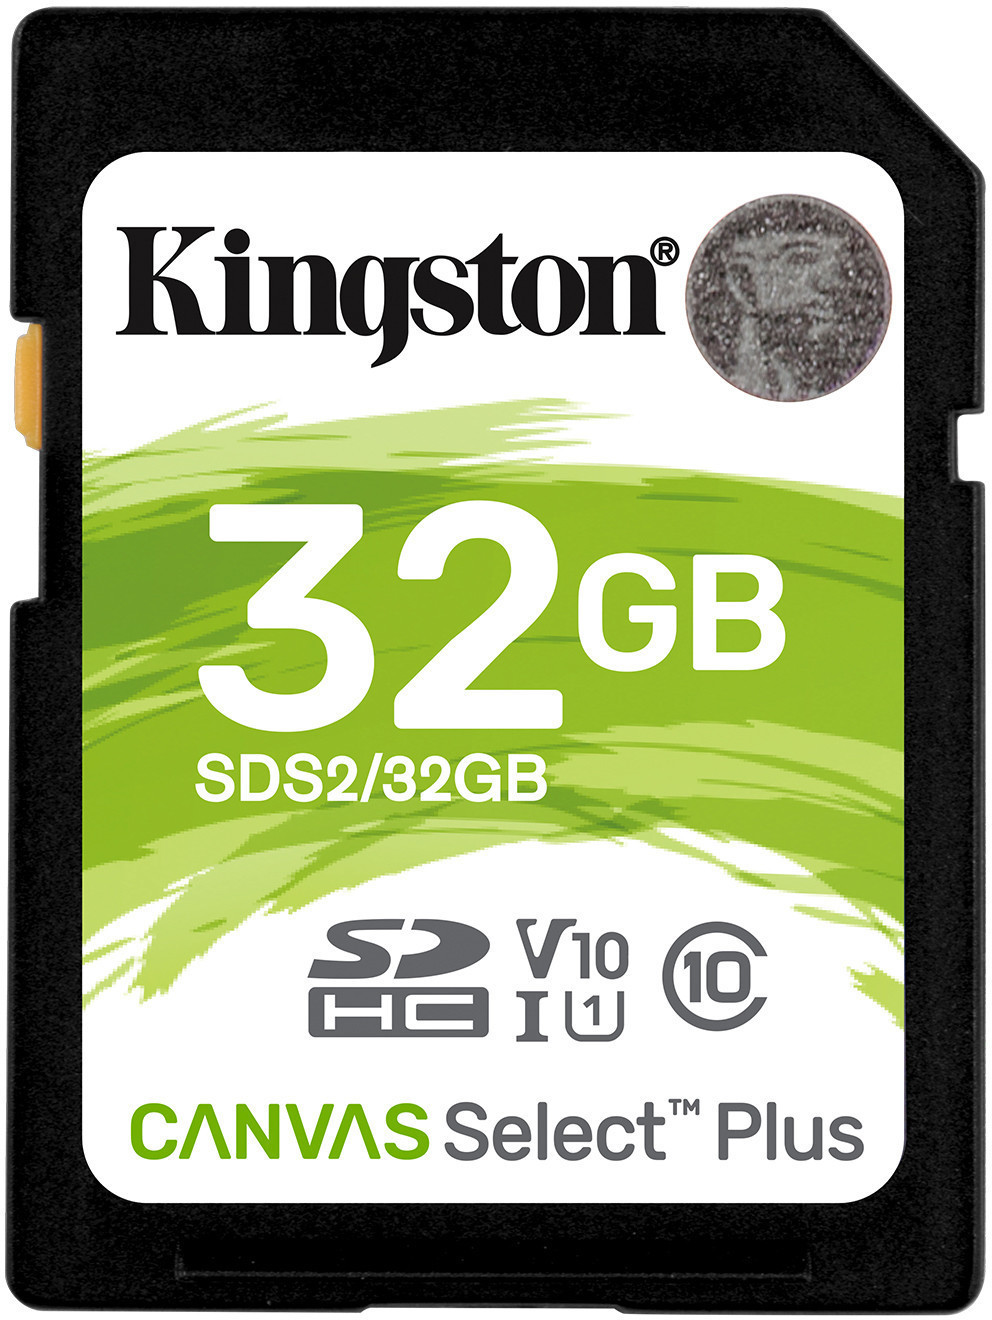 Kingston 64GB Samsung Galaxy Round MicroSDXC Canvas Select Plus Card Verified by SanFlash. 100MBs Works with Kingston